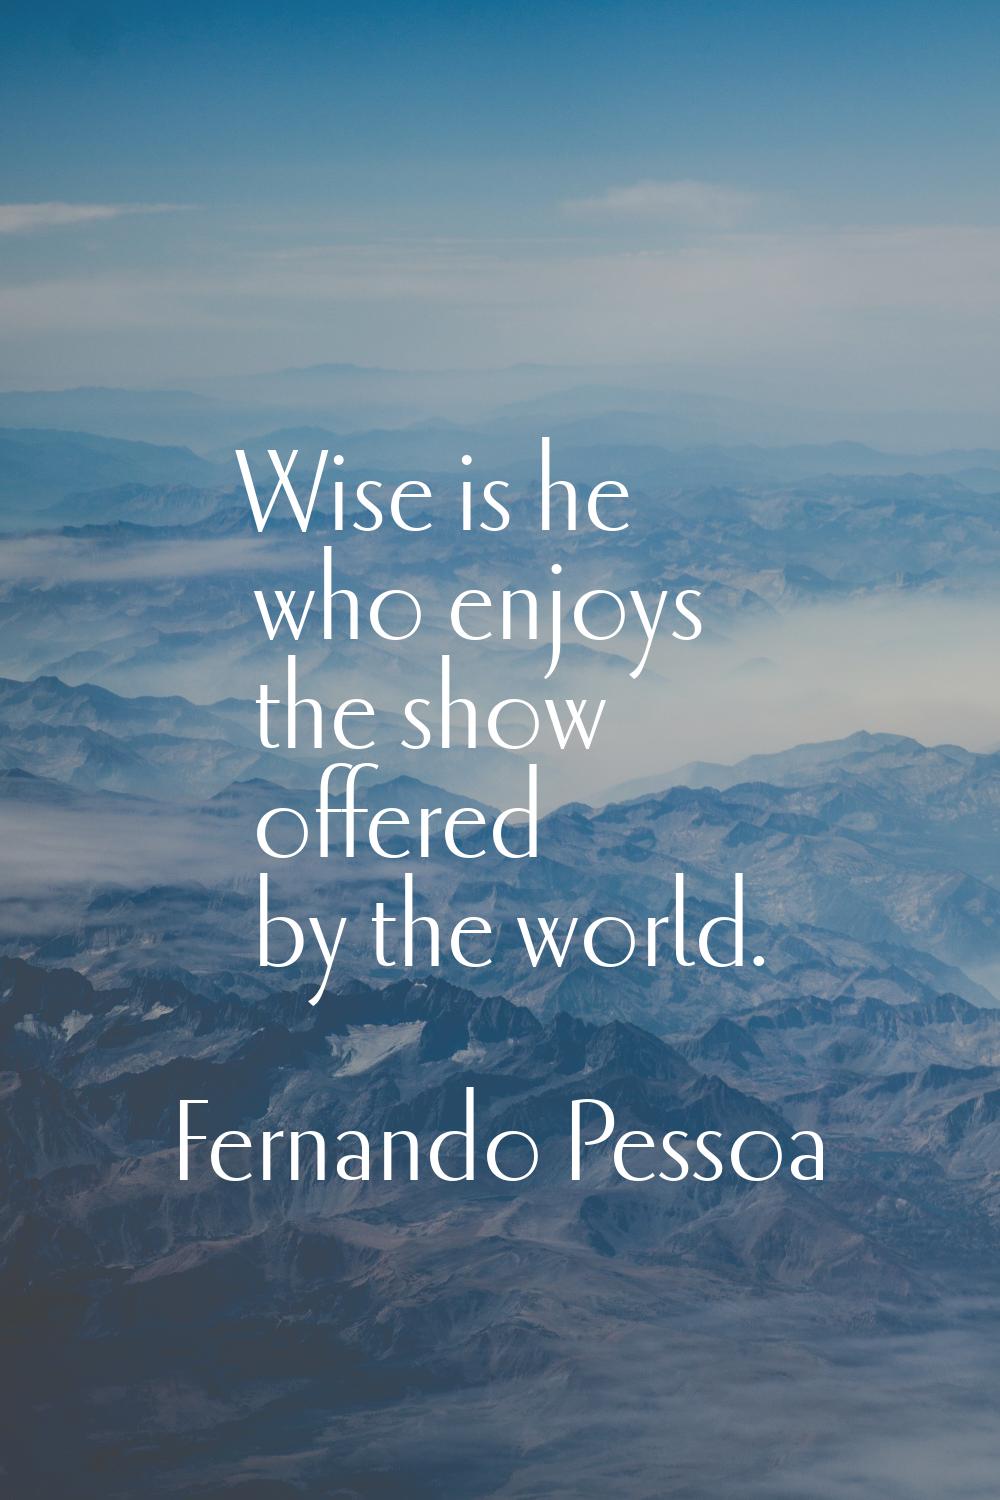 Wise is he who enjoys the show offered by the world.